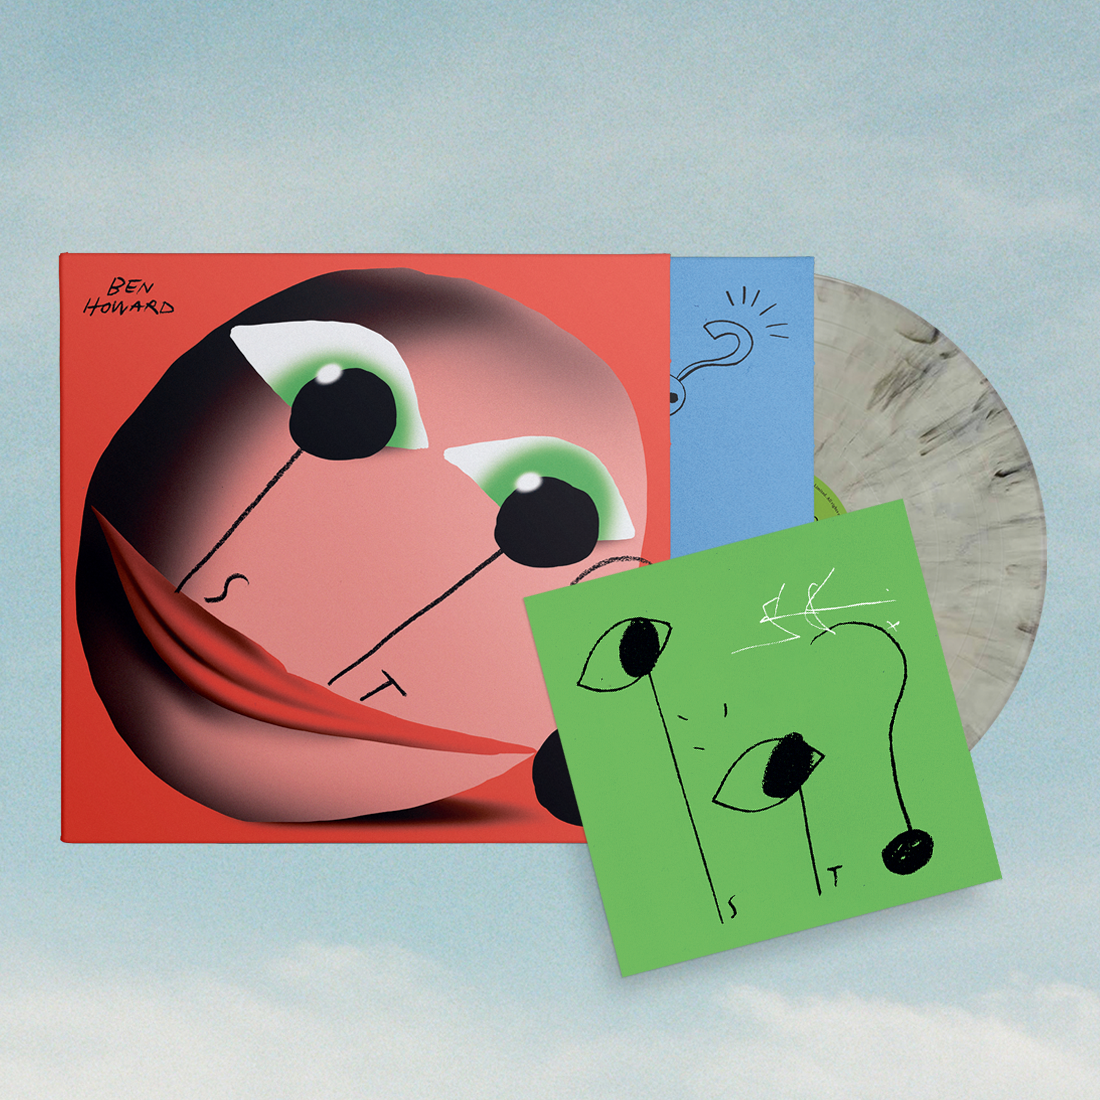 Is It? Limited Vinyl LP + Exclusive Signed Print